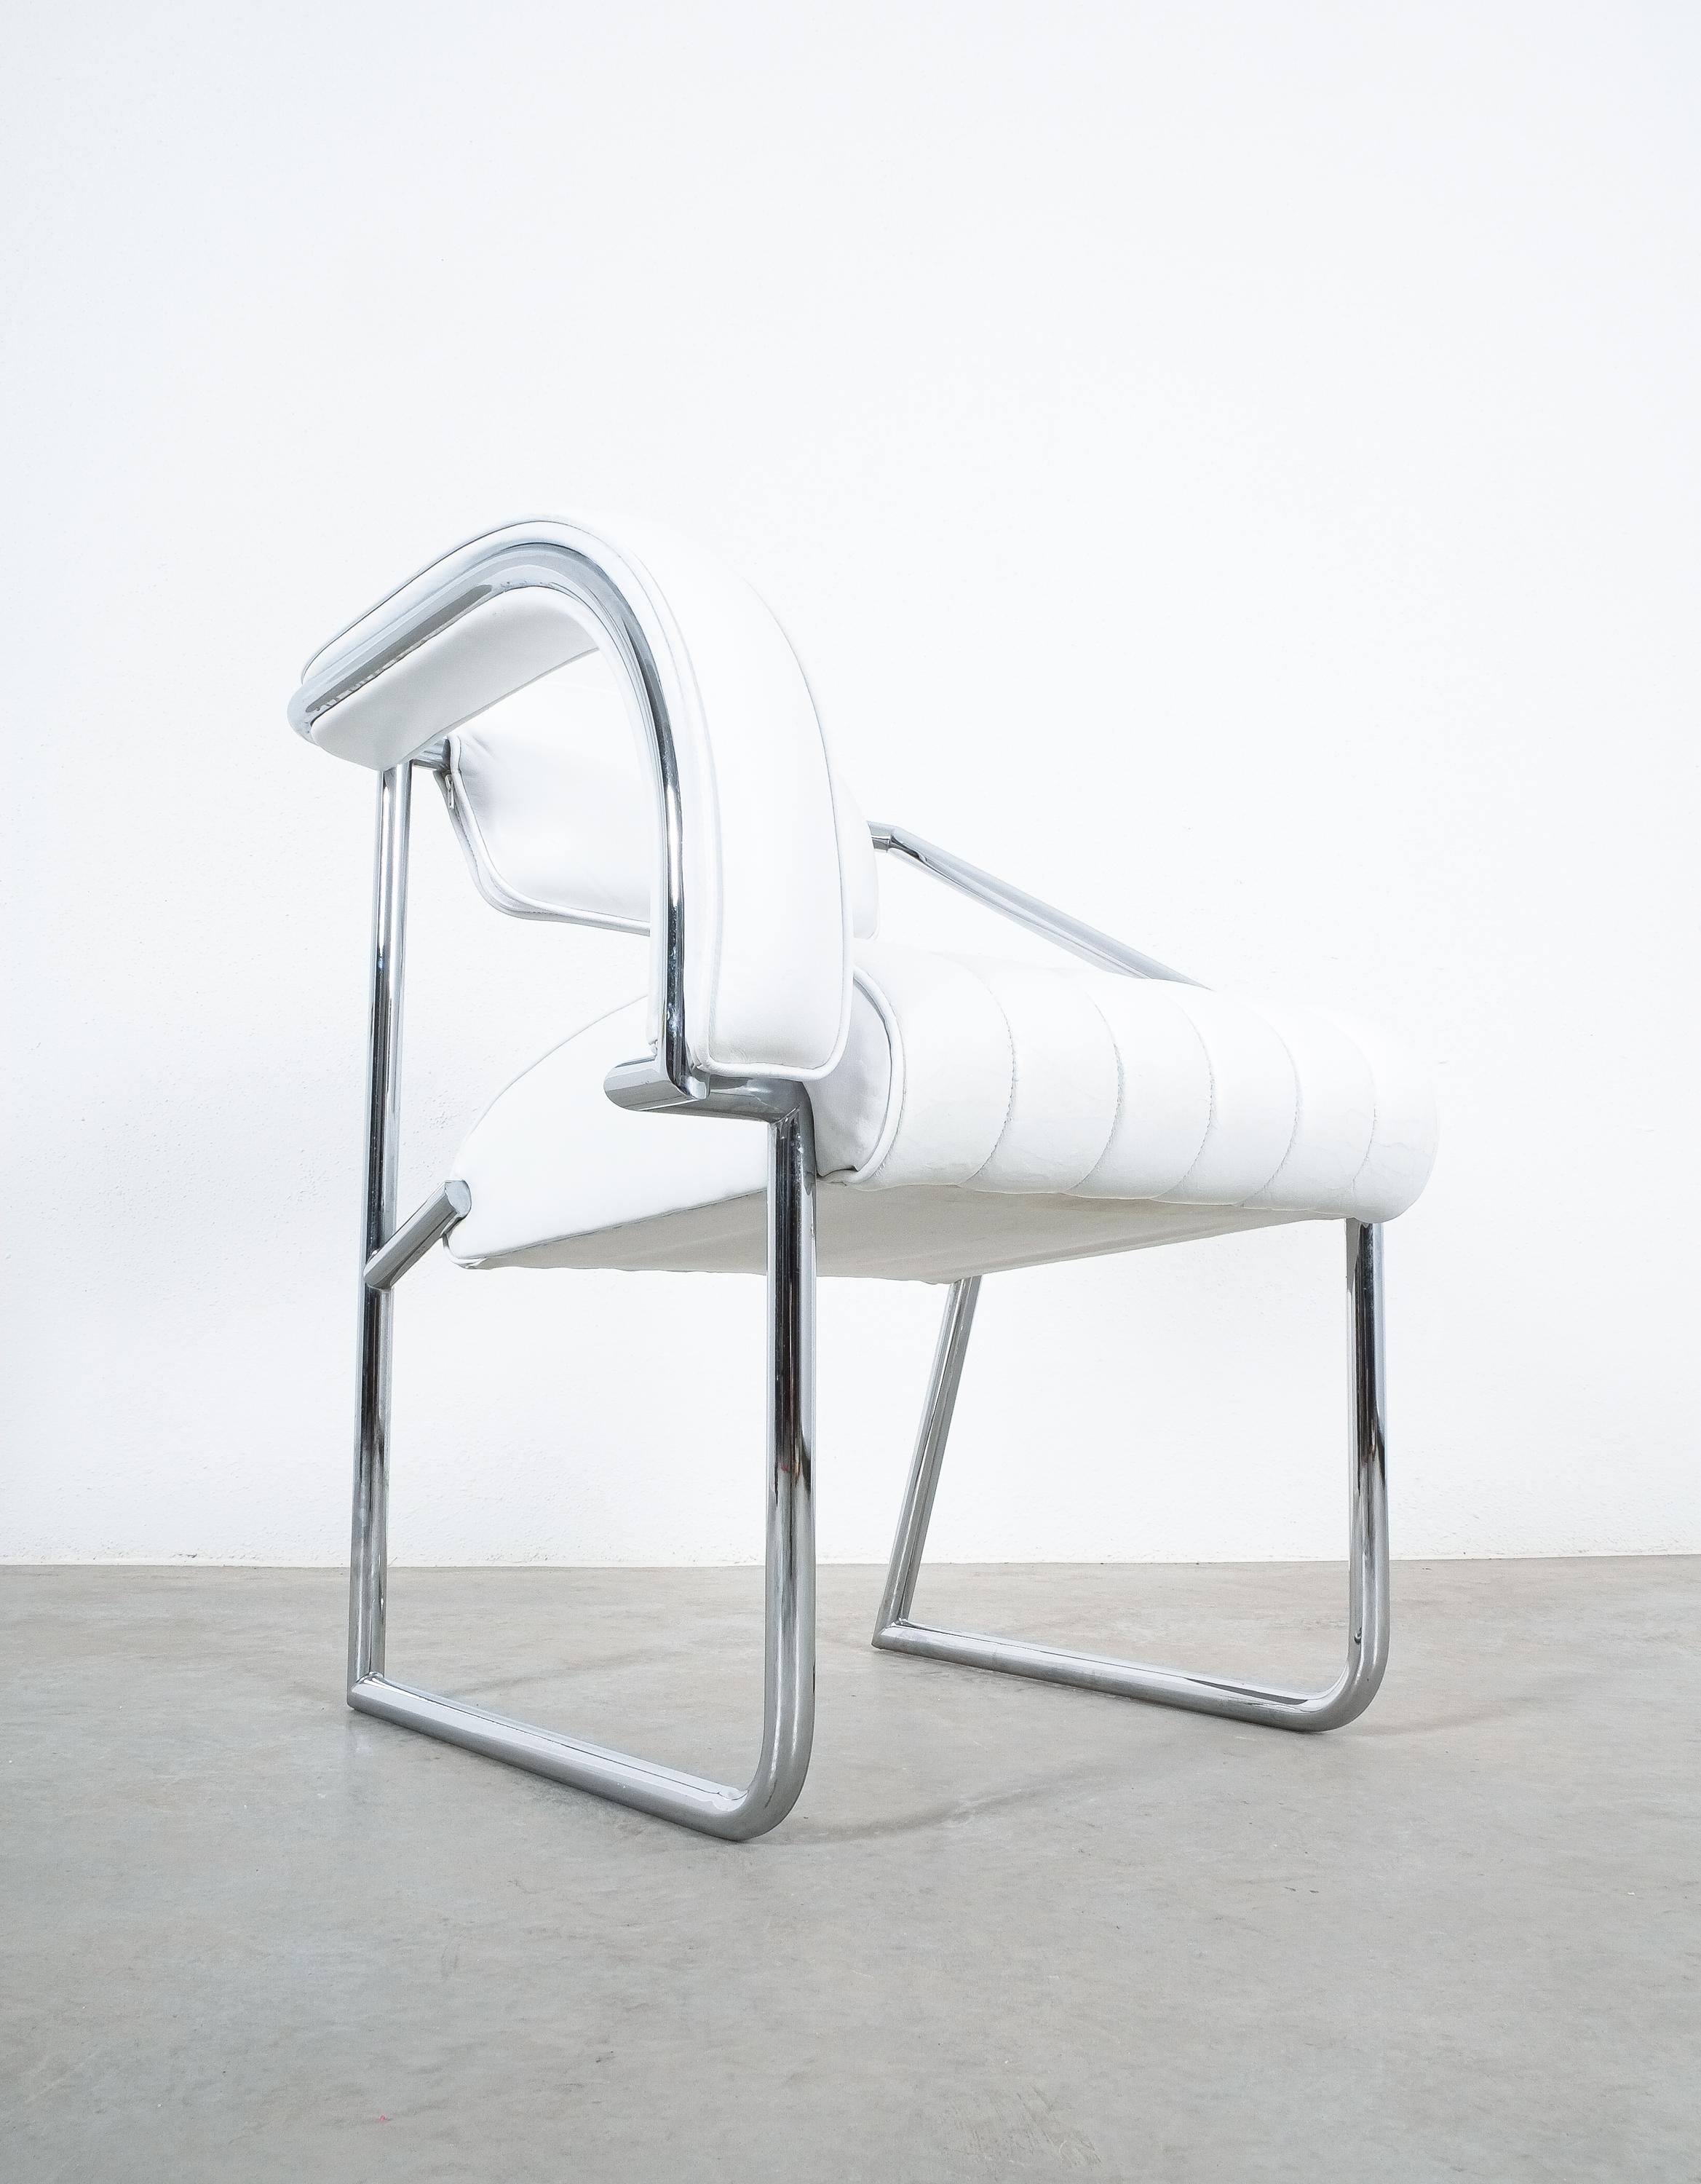 Dyed Non Conformist Chair by Eileen Gray, Designed 1926, Chrome White Leather